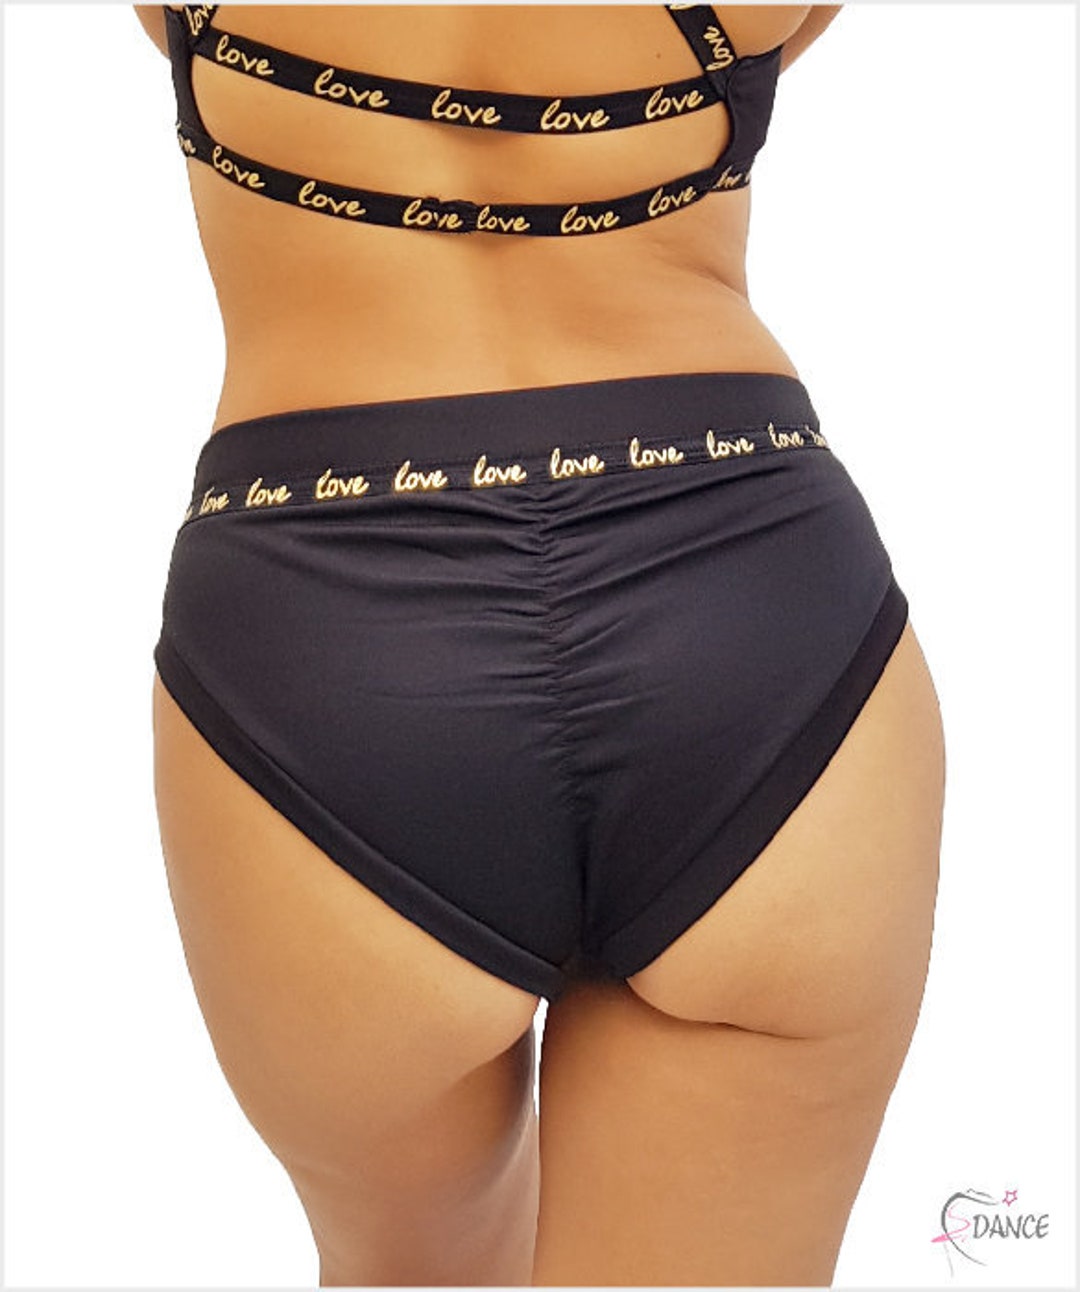 Sexy Booty Shorts Panties for Women Pole Wear or Stripper photo picture